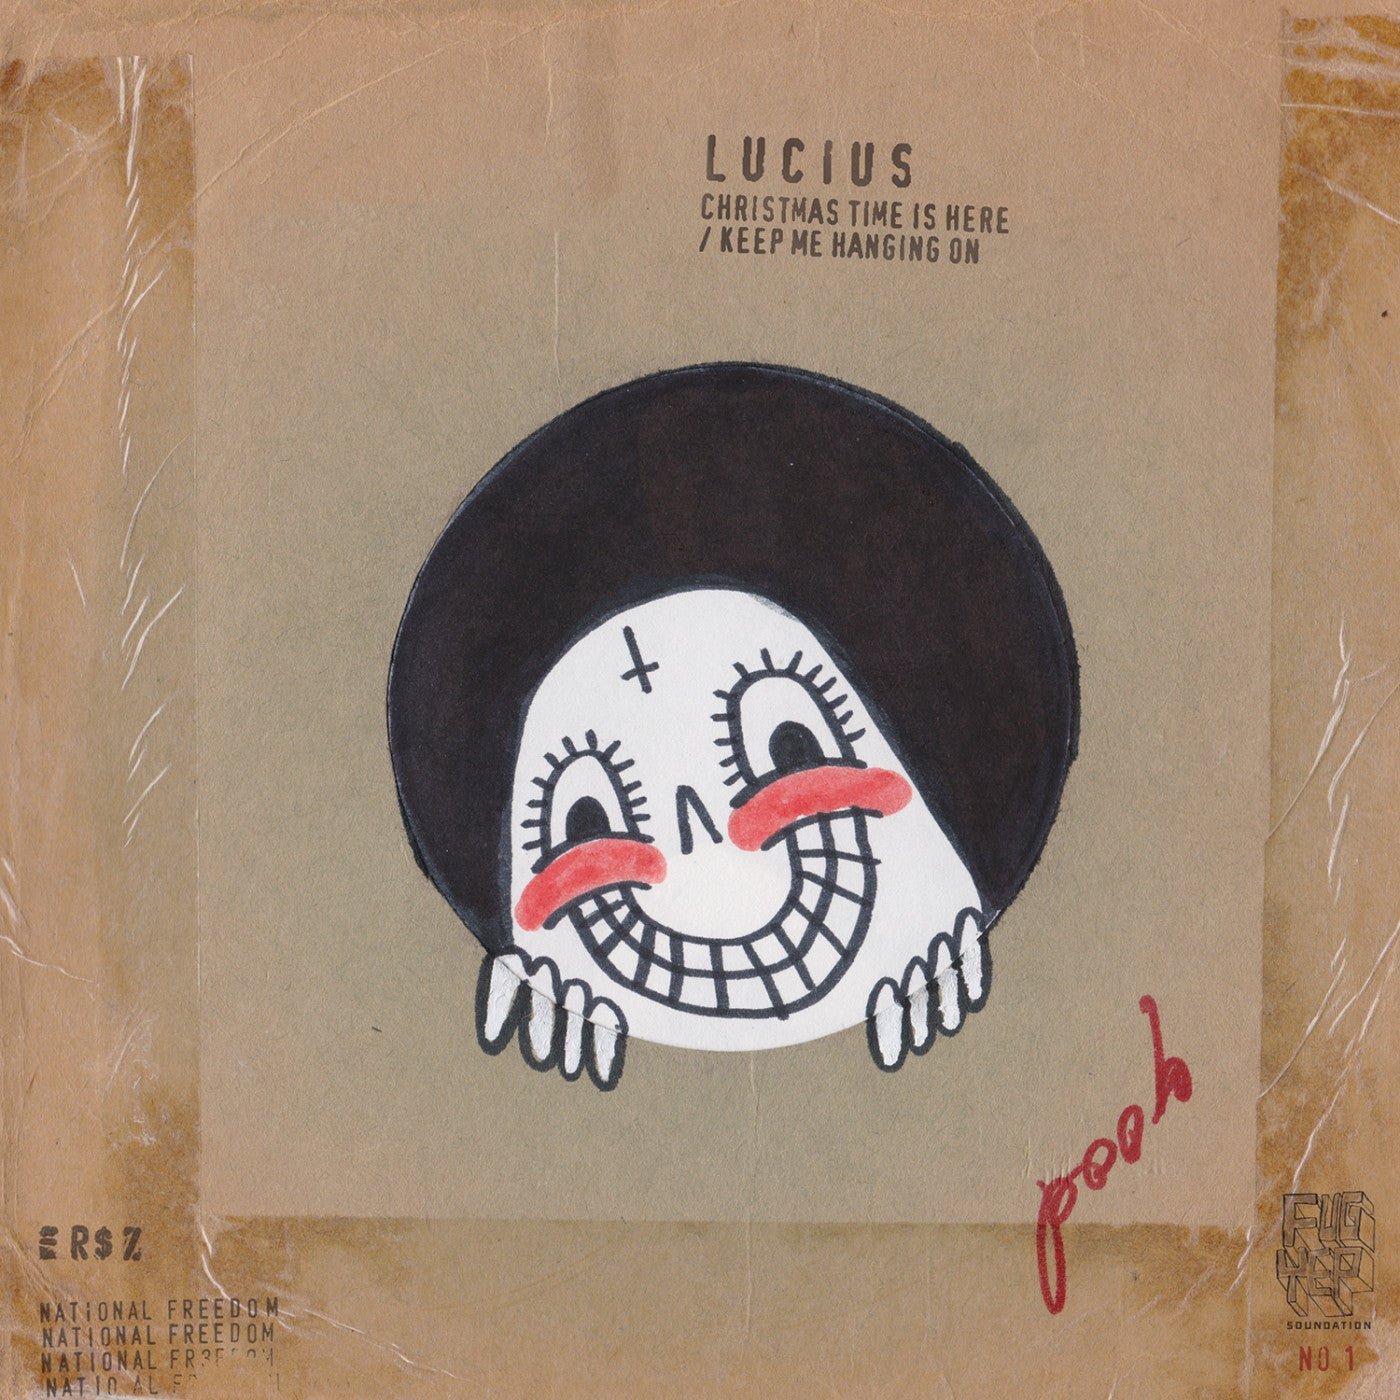 Lucius - Christmas Time Is Here / Keep Me Hanging On (7" Single) (SIGNED) - 858275052411 SIGNED - 7" Singles - Yellow Racket Records